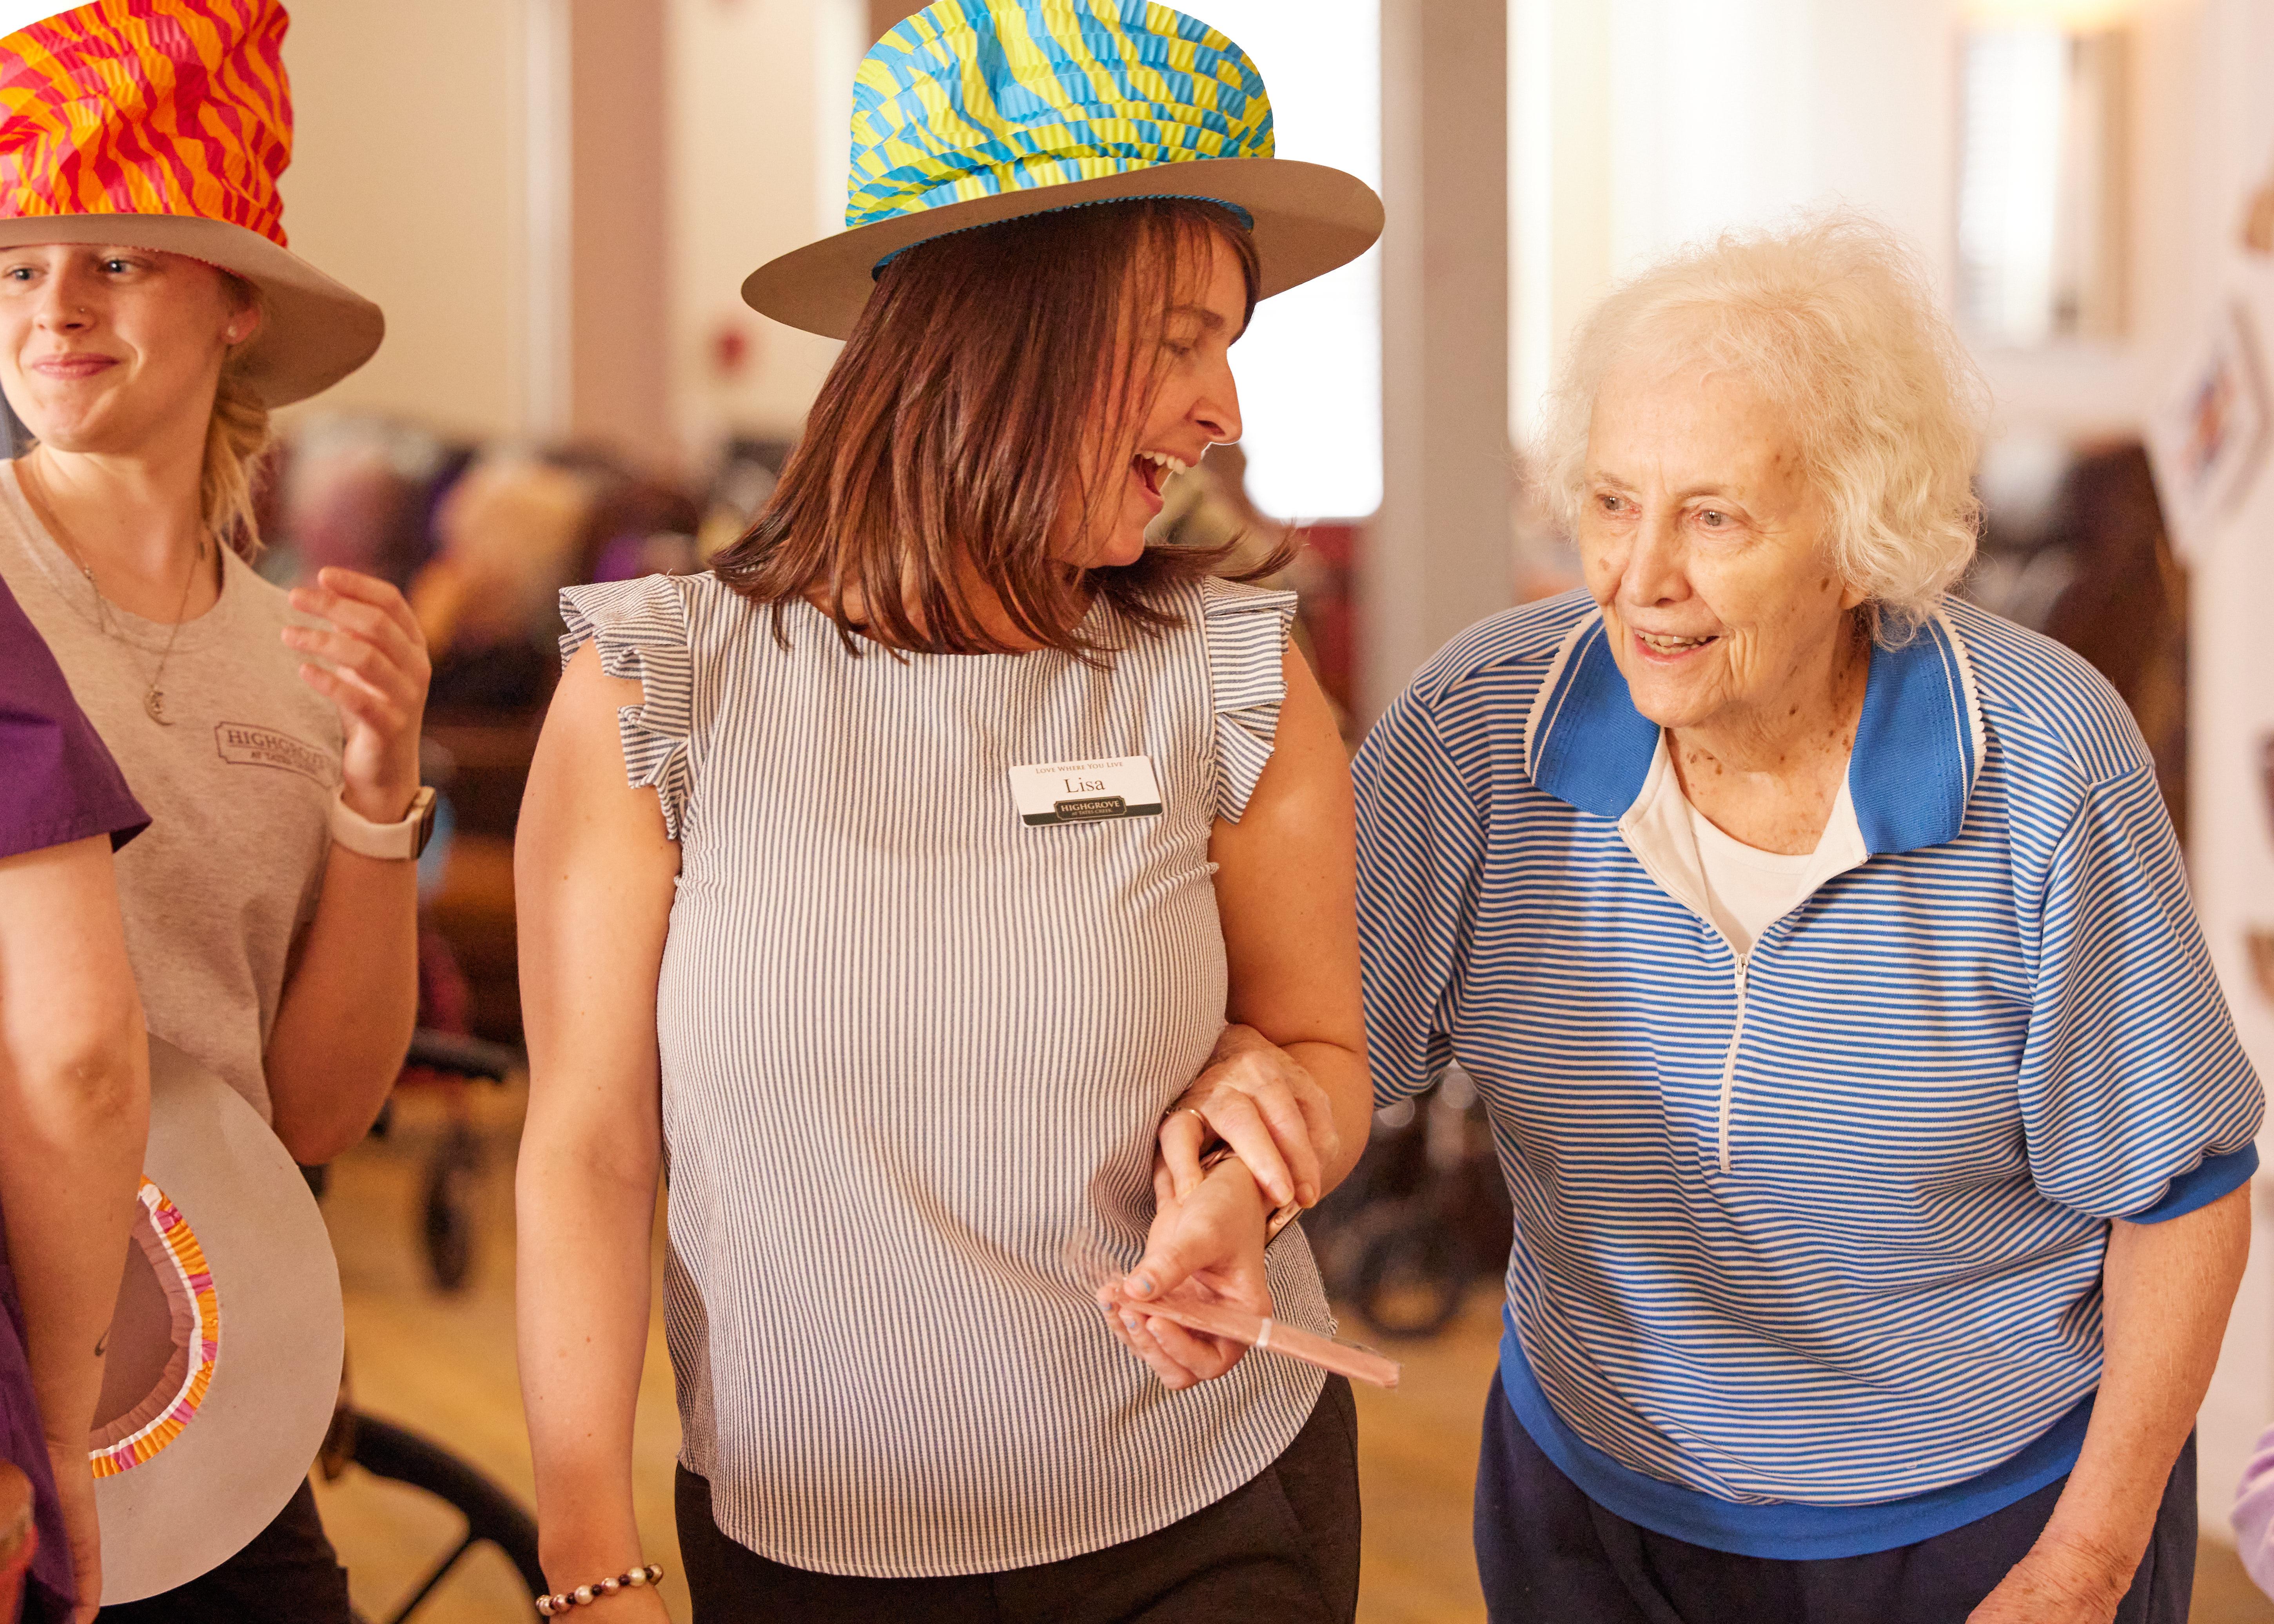 A caregiver in a colorful hat dances with a smiling woman in a blue top.